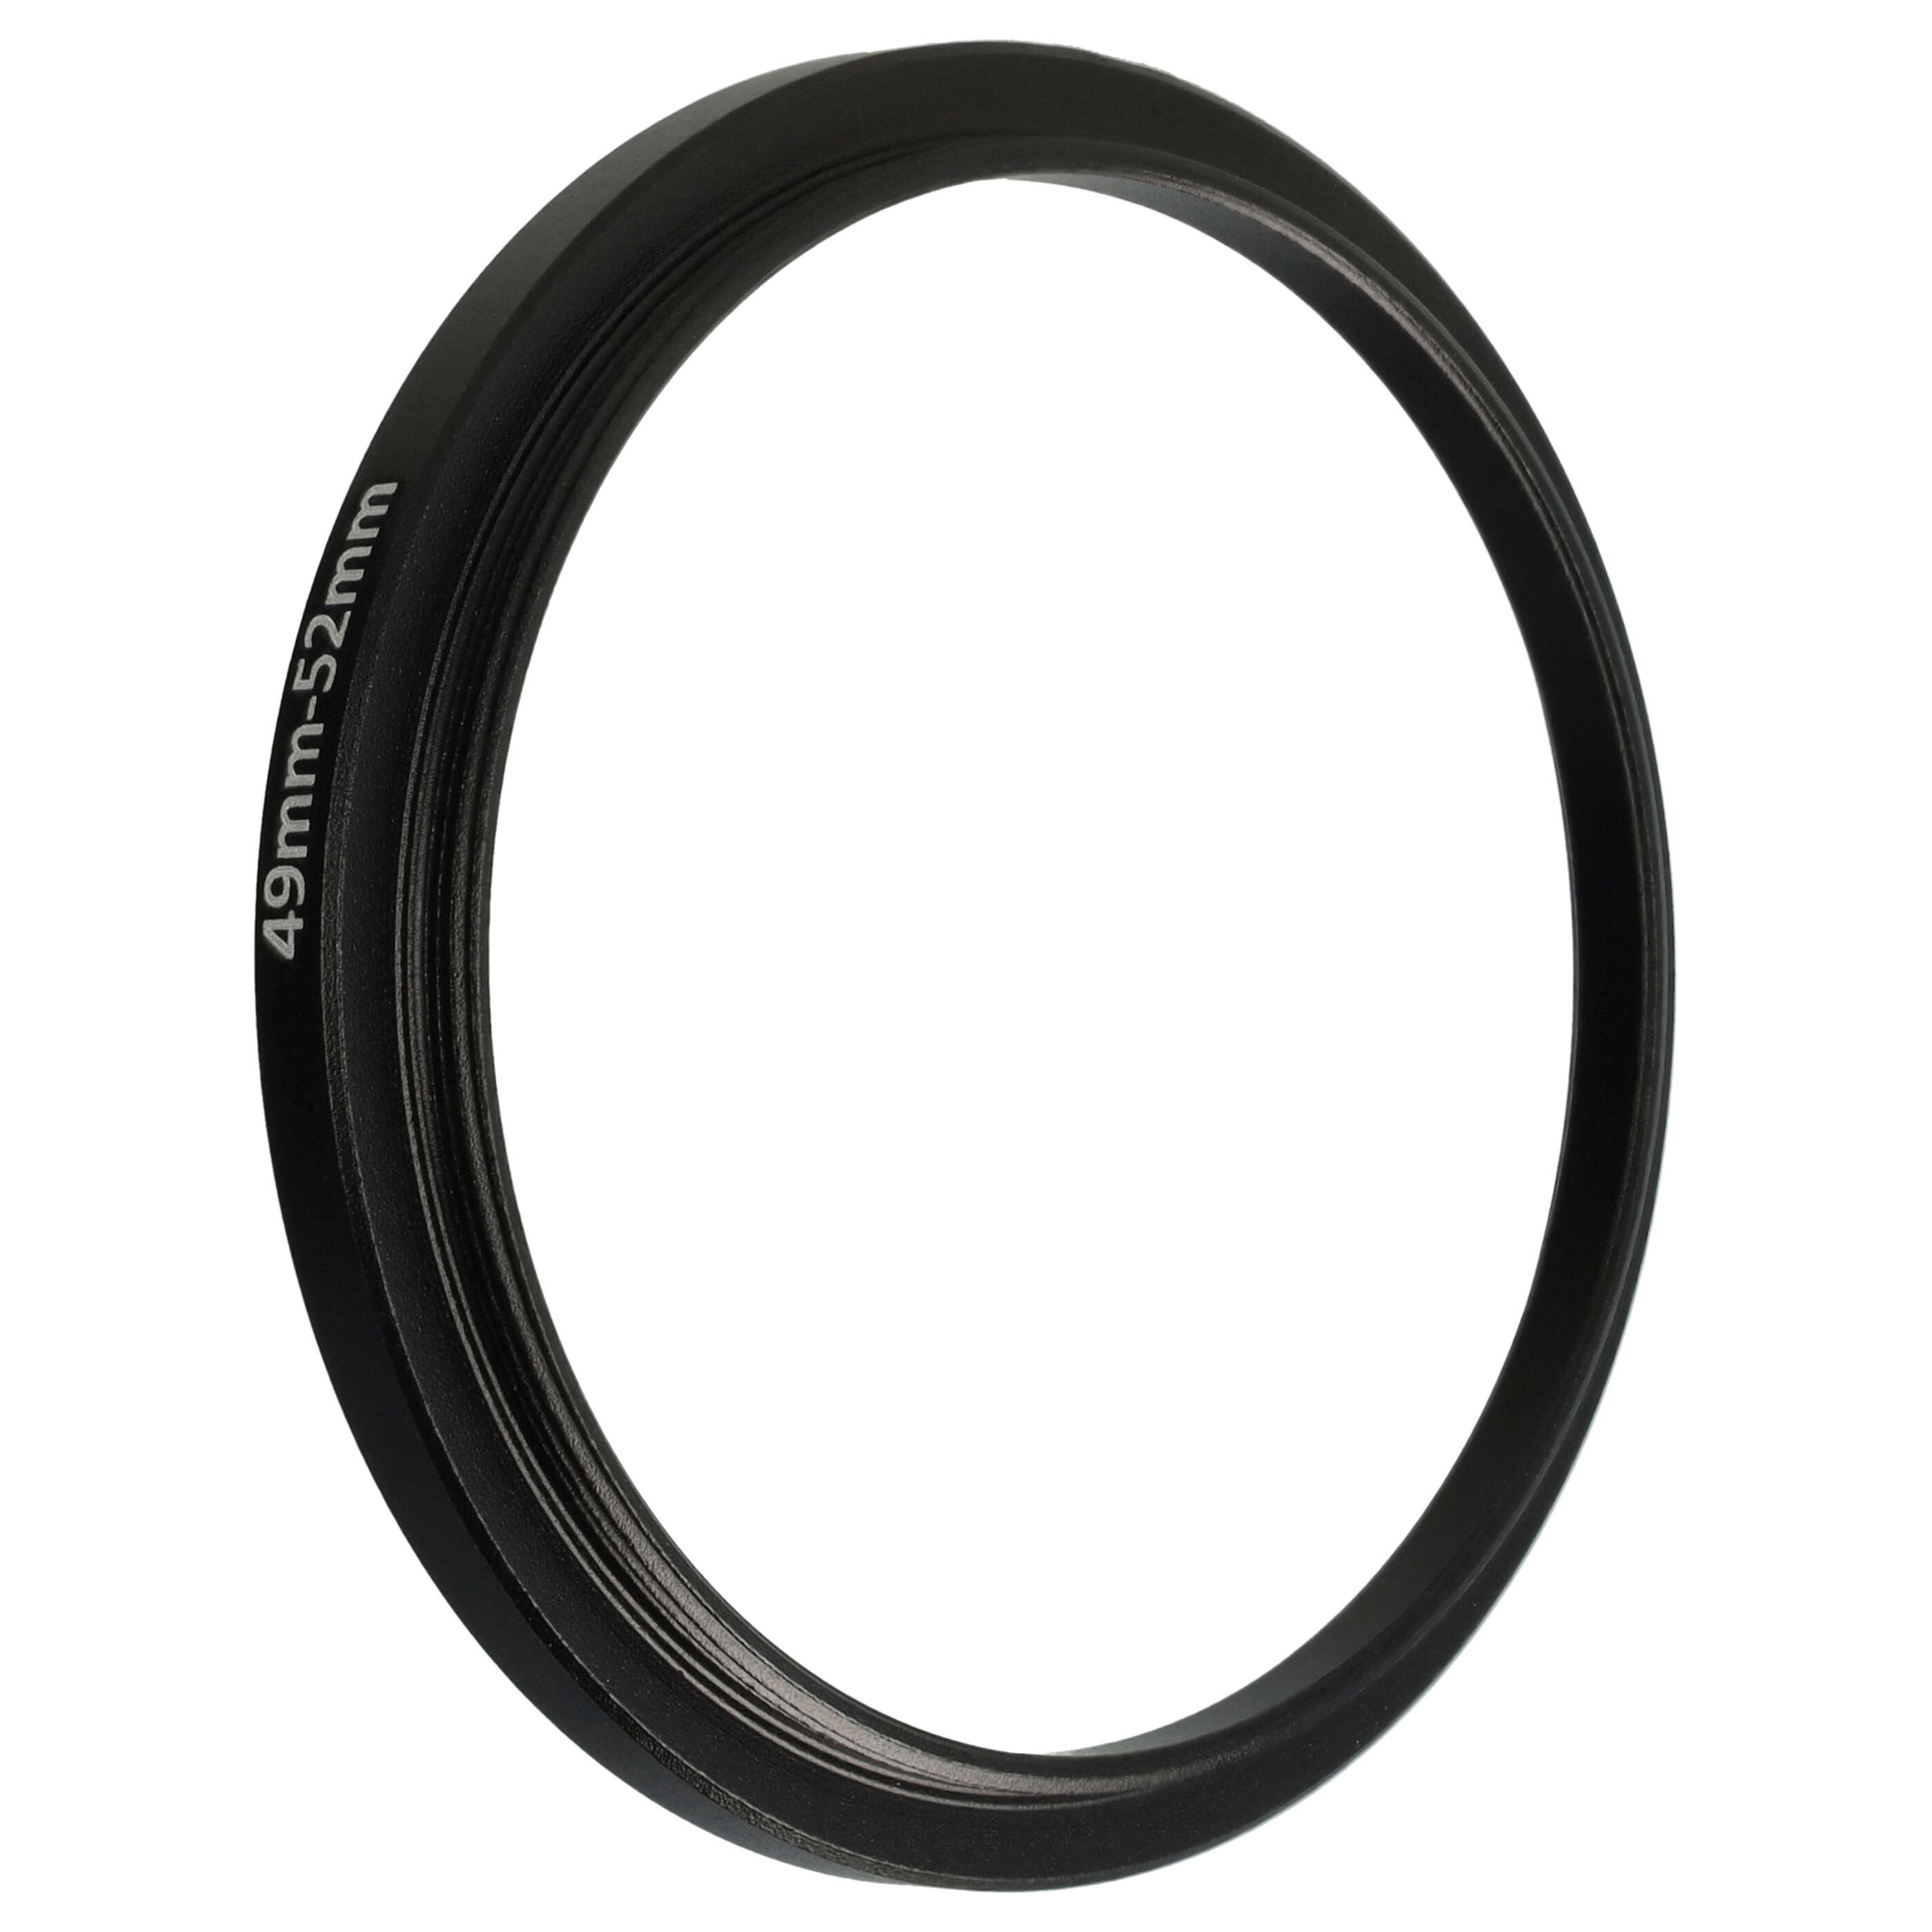 Step-Up Ring Adapter of 49 mm to 52 mmfor various Camera Lens - Filter Adapter